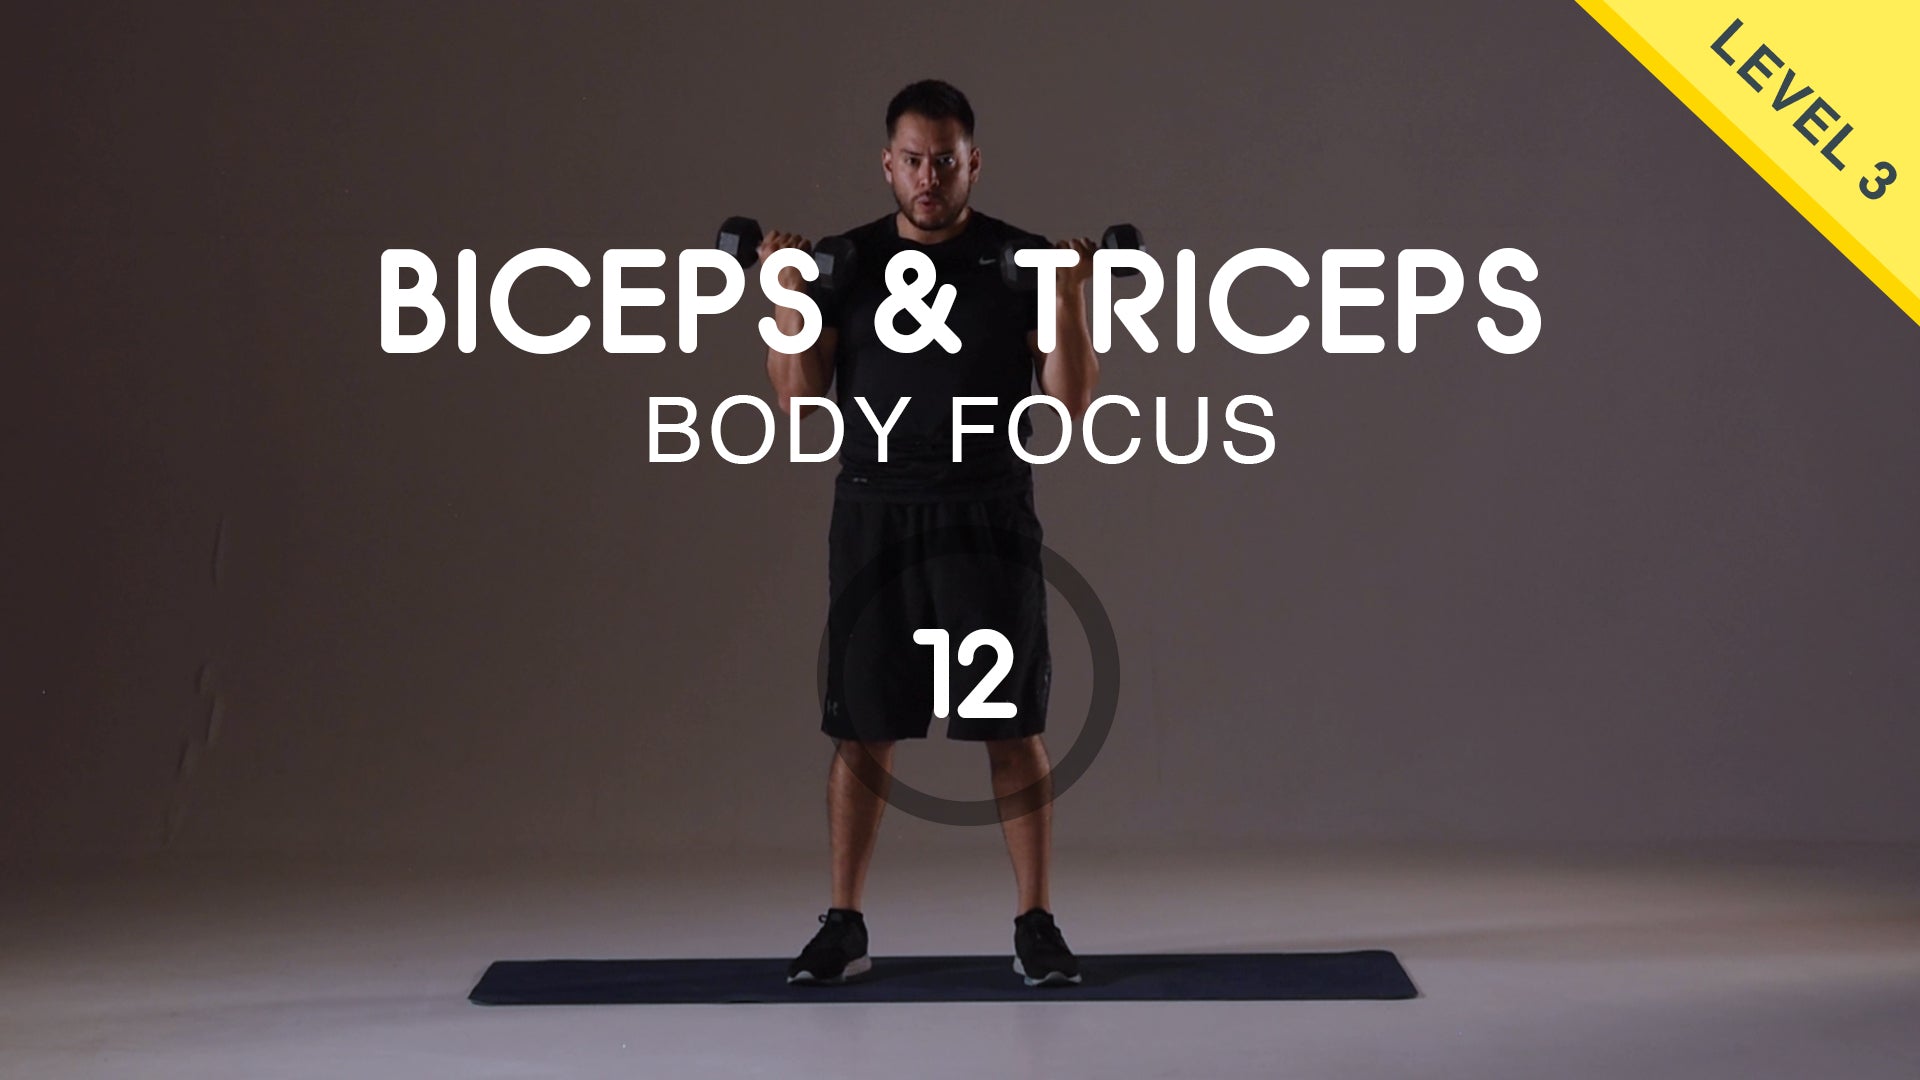 Biceps & Triceps - Free Workout Videos for Home or Work – Group HIIT